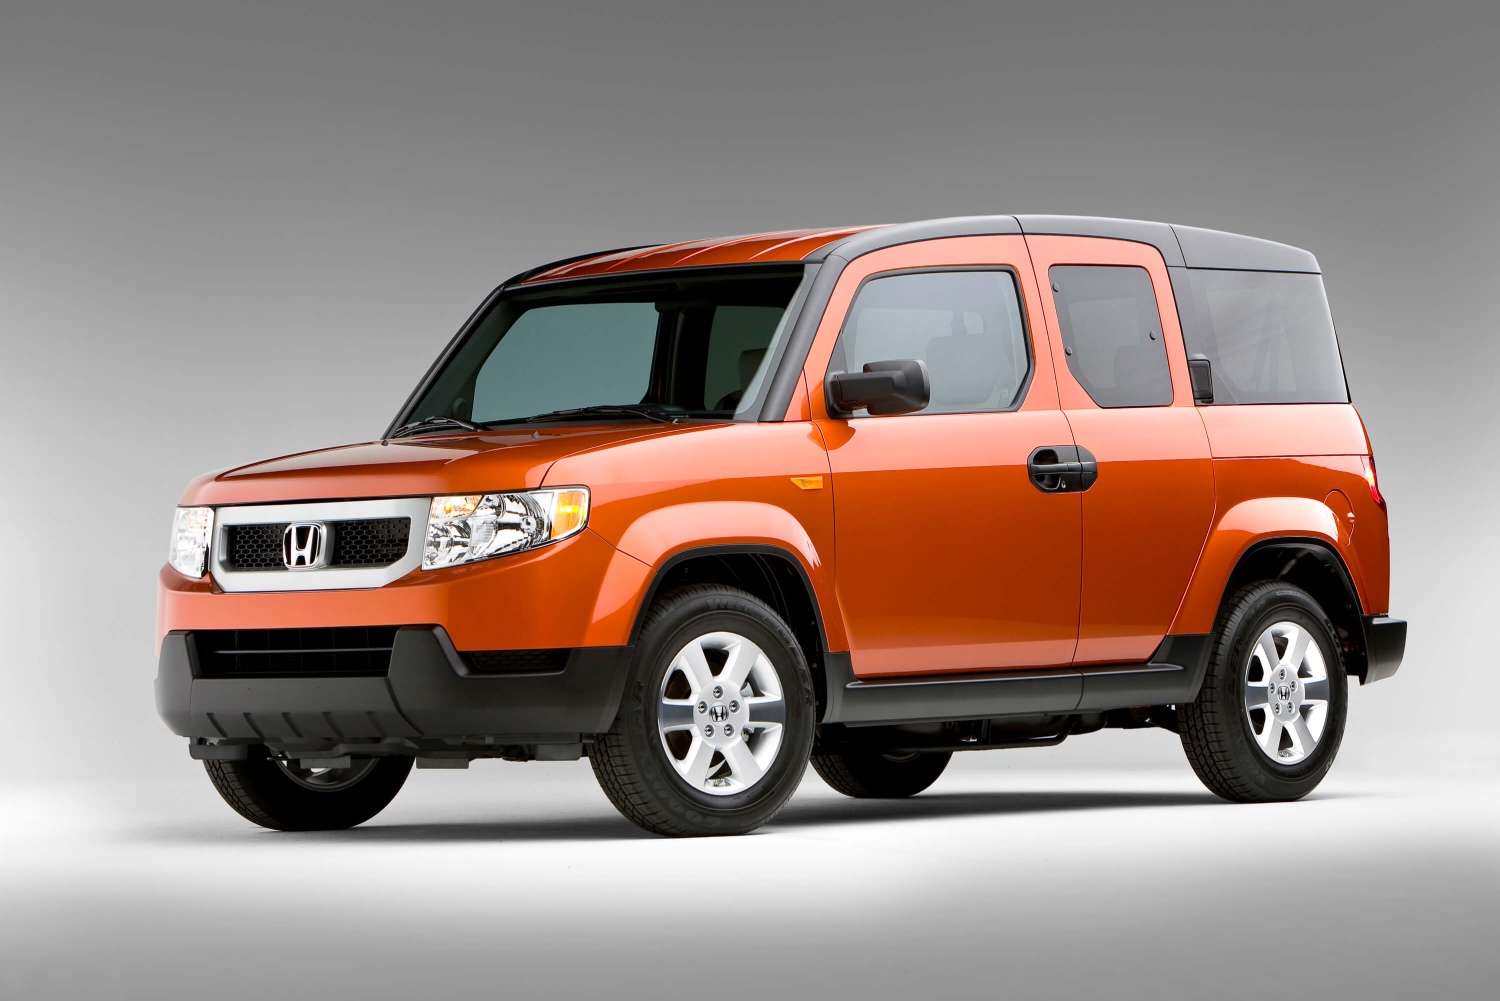 The most common Honda Element problems, seen here in orange